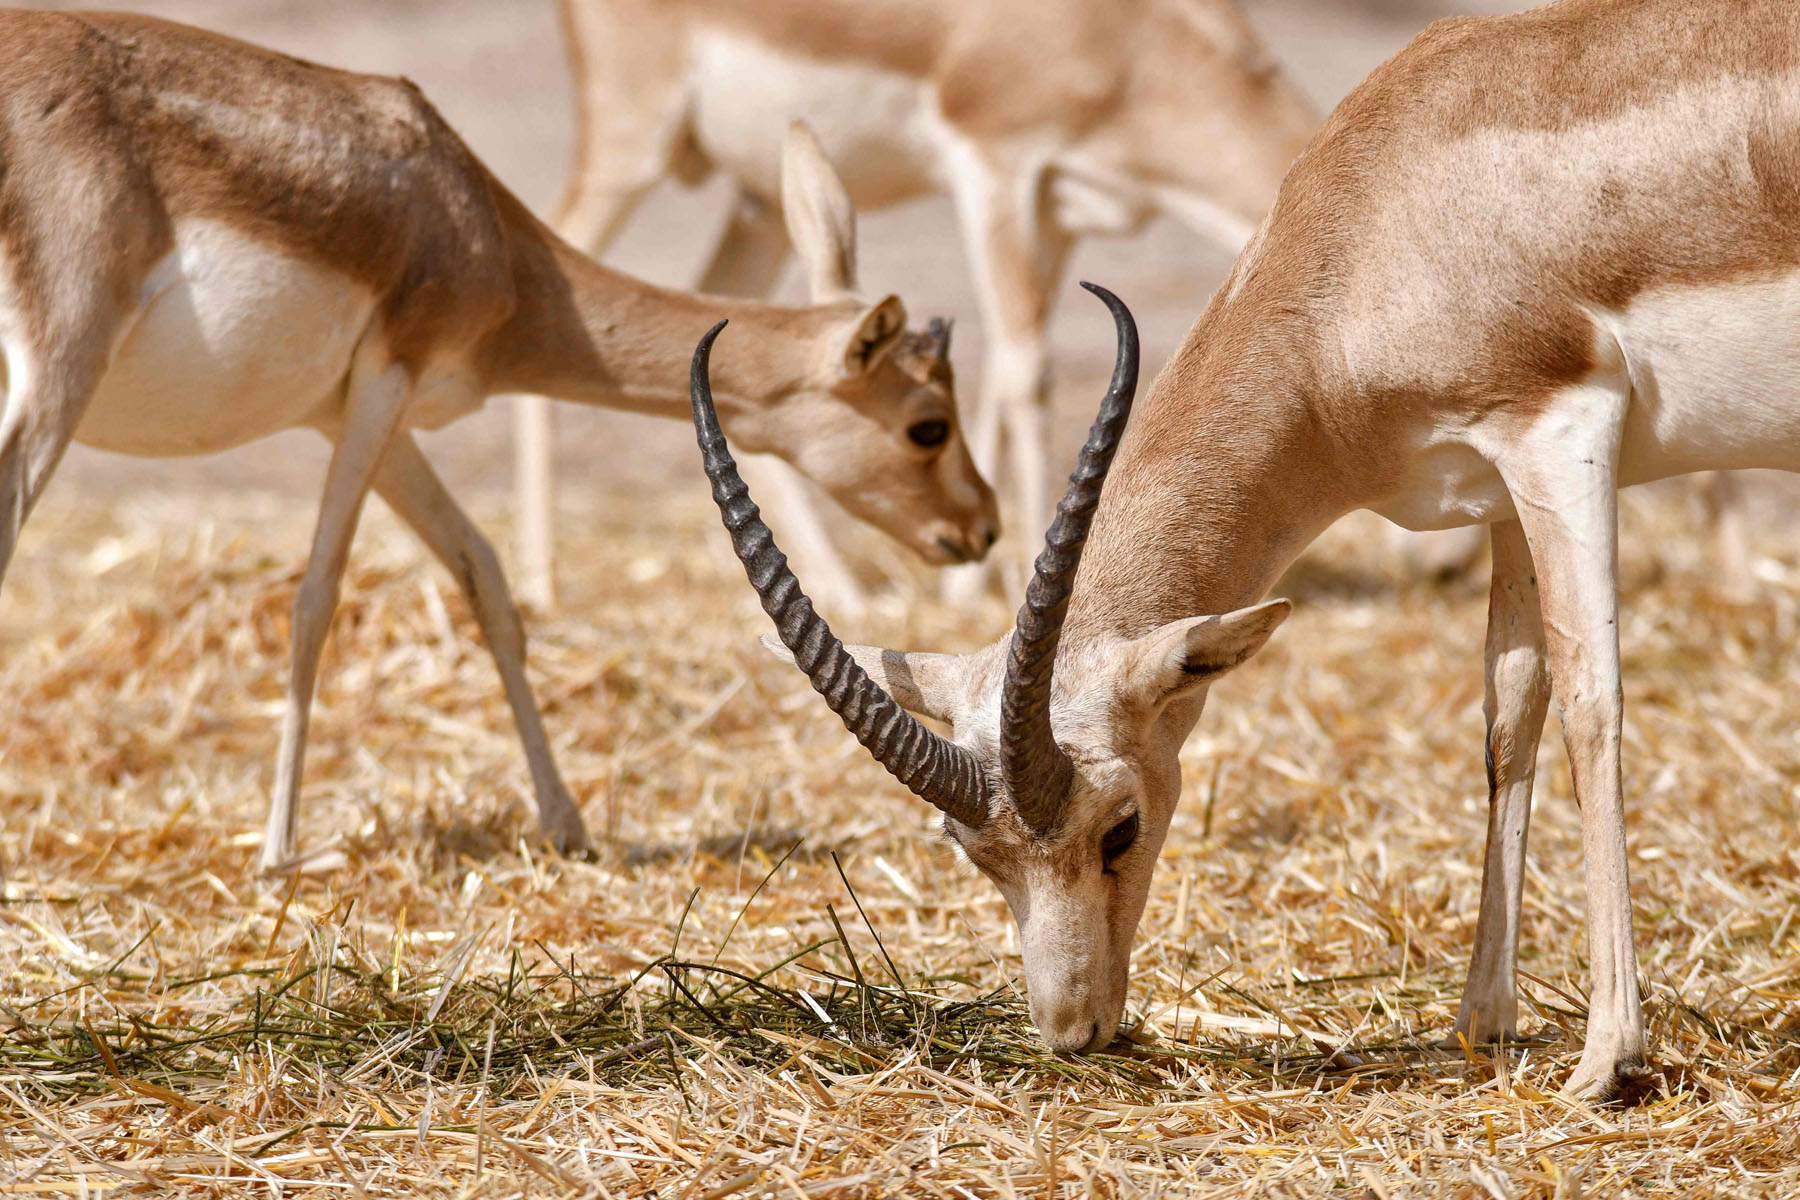 Rhim gazelles graze at the Sawa wildlife reserve in the desert of Samawa in Iraq's southern province of al-Muthanna on June 8, 2022. - Gazelles at the Iraqi wildlife reserve are dropping dead from lack of food, making them the latest victims in a country where climate change adds to the burdens after years of war. In little over one month, the slender-horned gazelle population at the reserve has dropped from 148 to 87. Lack of funding along with a shortage of rain has deprived them of food, another reflection of the country's drought which has dried up lakes and led to declining crop yields. The International Union for Conservation of Nature classes the animals as endangered on its Red List. (Photo by Asaad NIAZI / AFP)